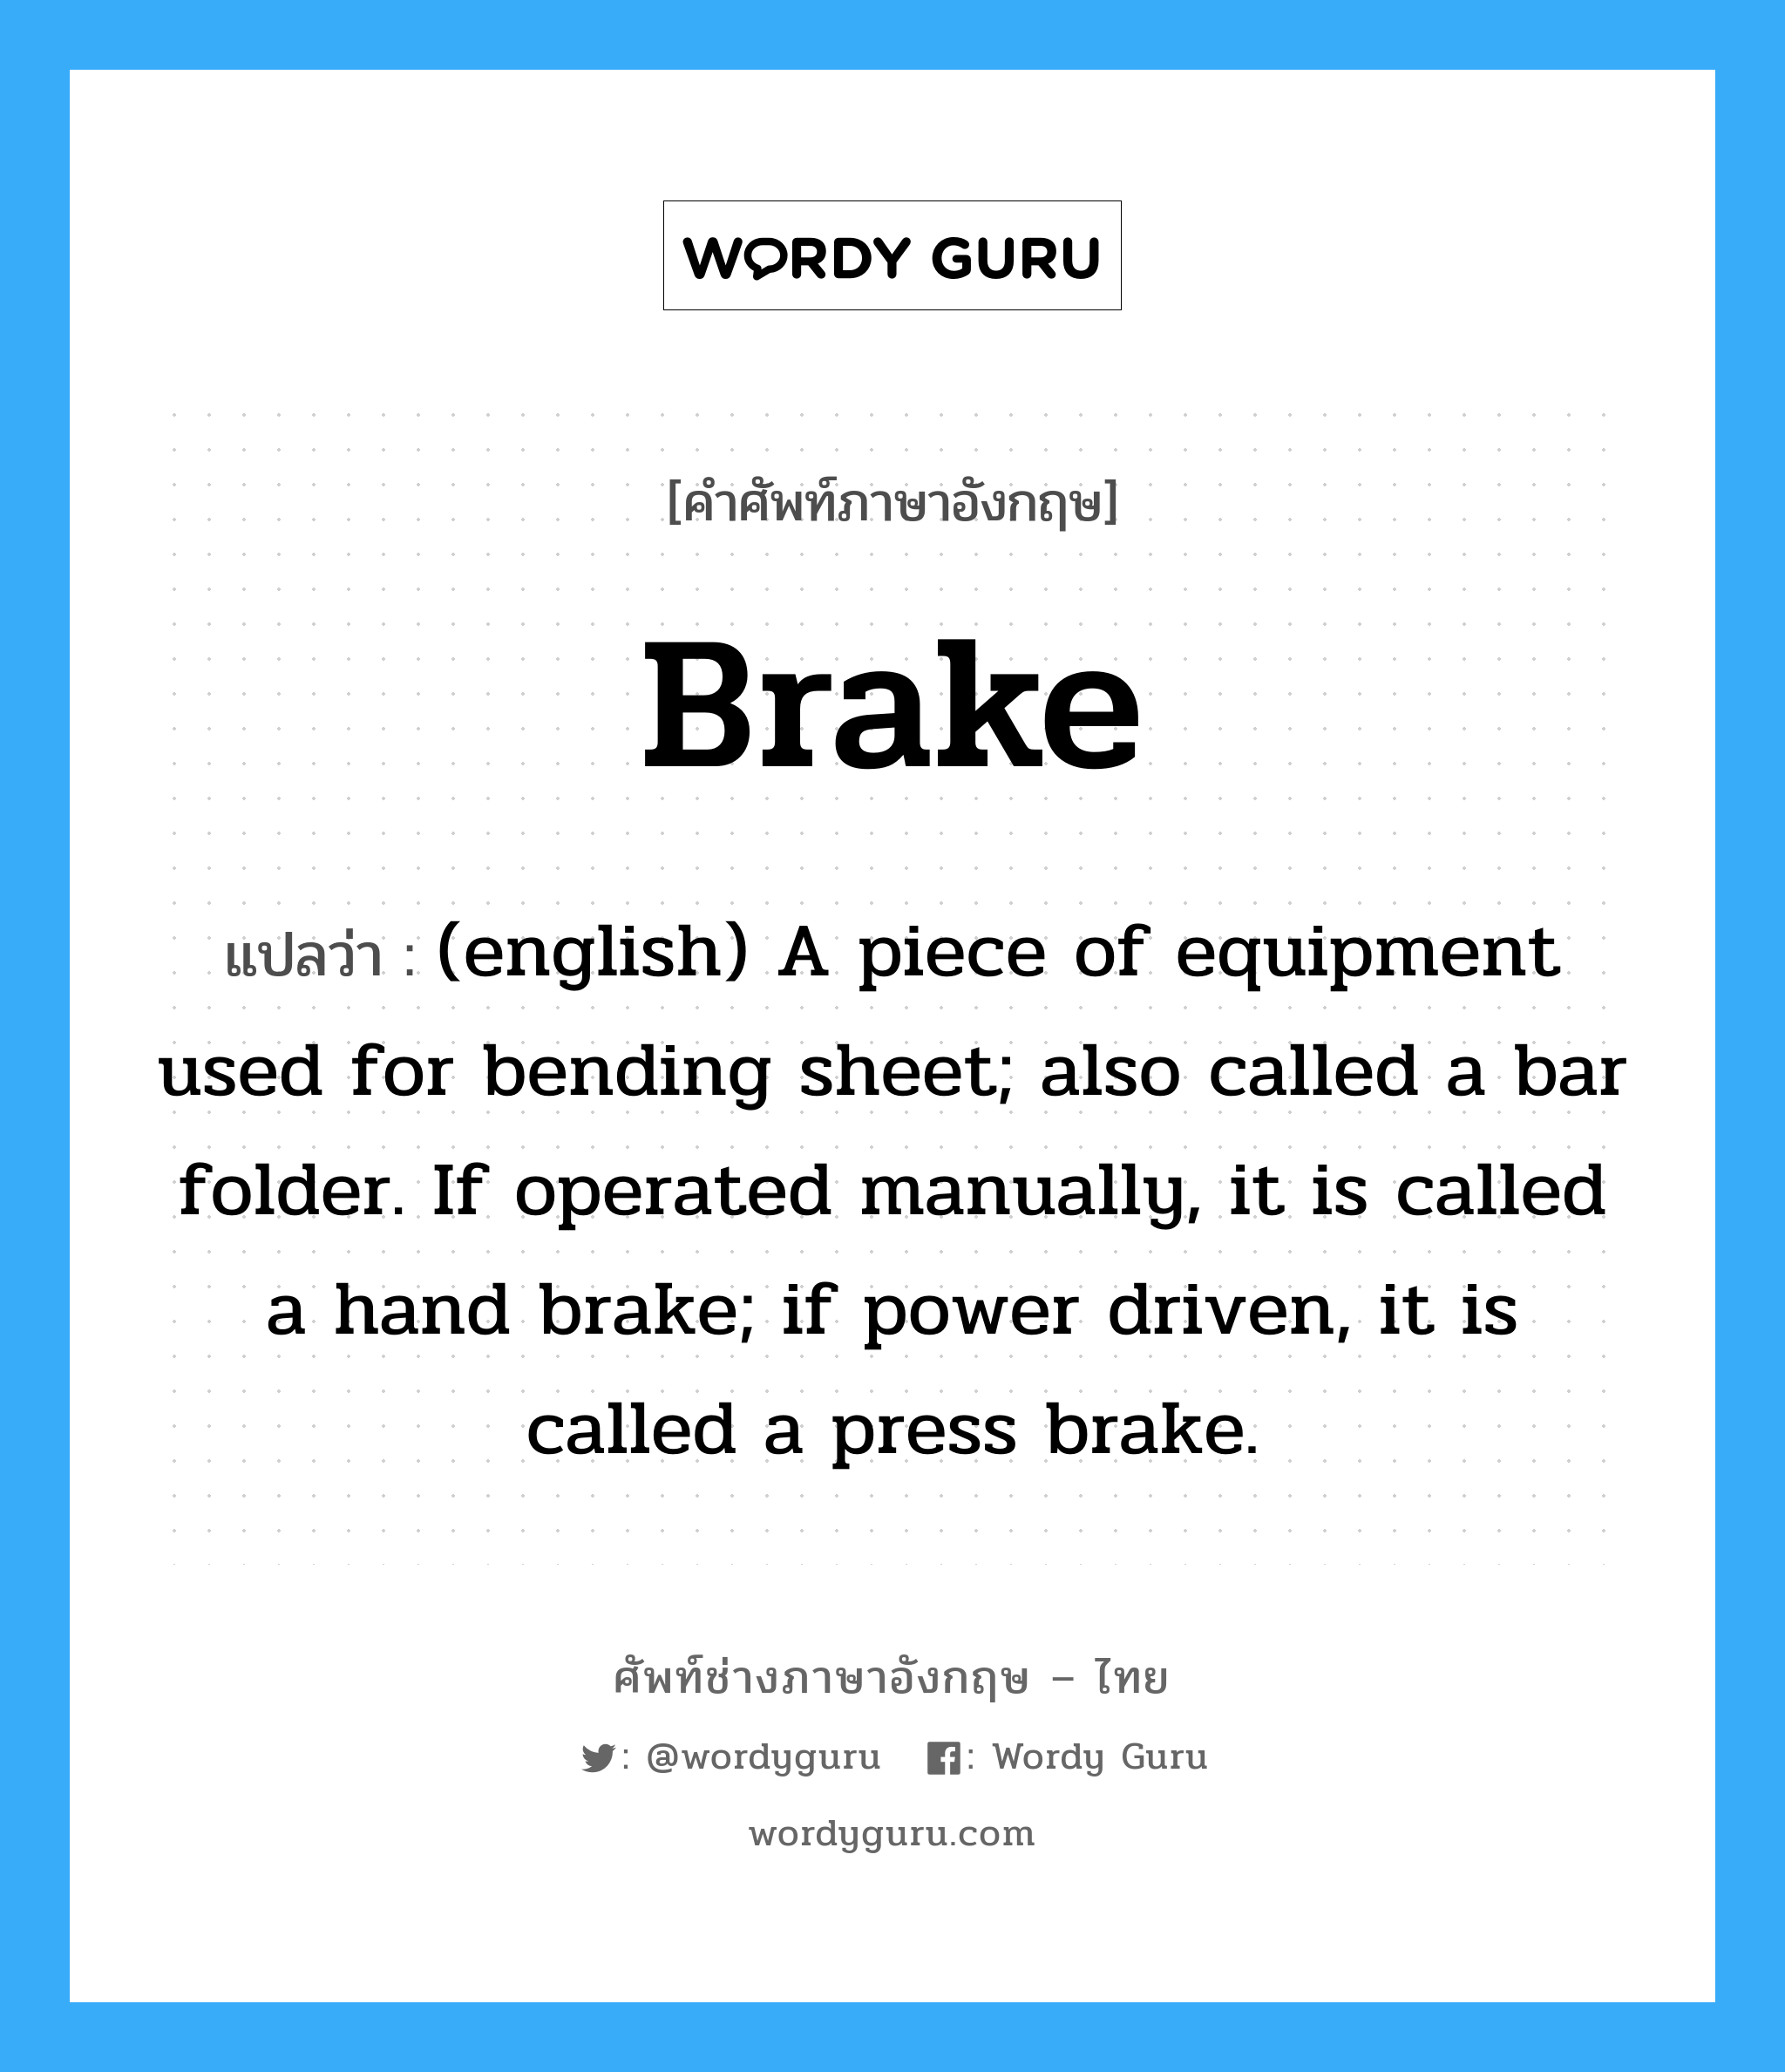 Brake แปลว่า?, คำศัพท์ช่างภาษาอังกฤษ - ไทย Brake คำศัพท์ภาษาอังกฤษ Brake แปลว่า (english) A piece of equipment used for bending sheet; also called a bar folder. If operated manually, it is called a hand brake; if power driven, it is called a press brake.